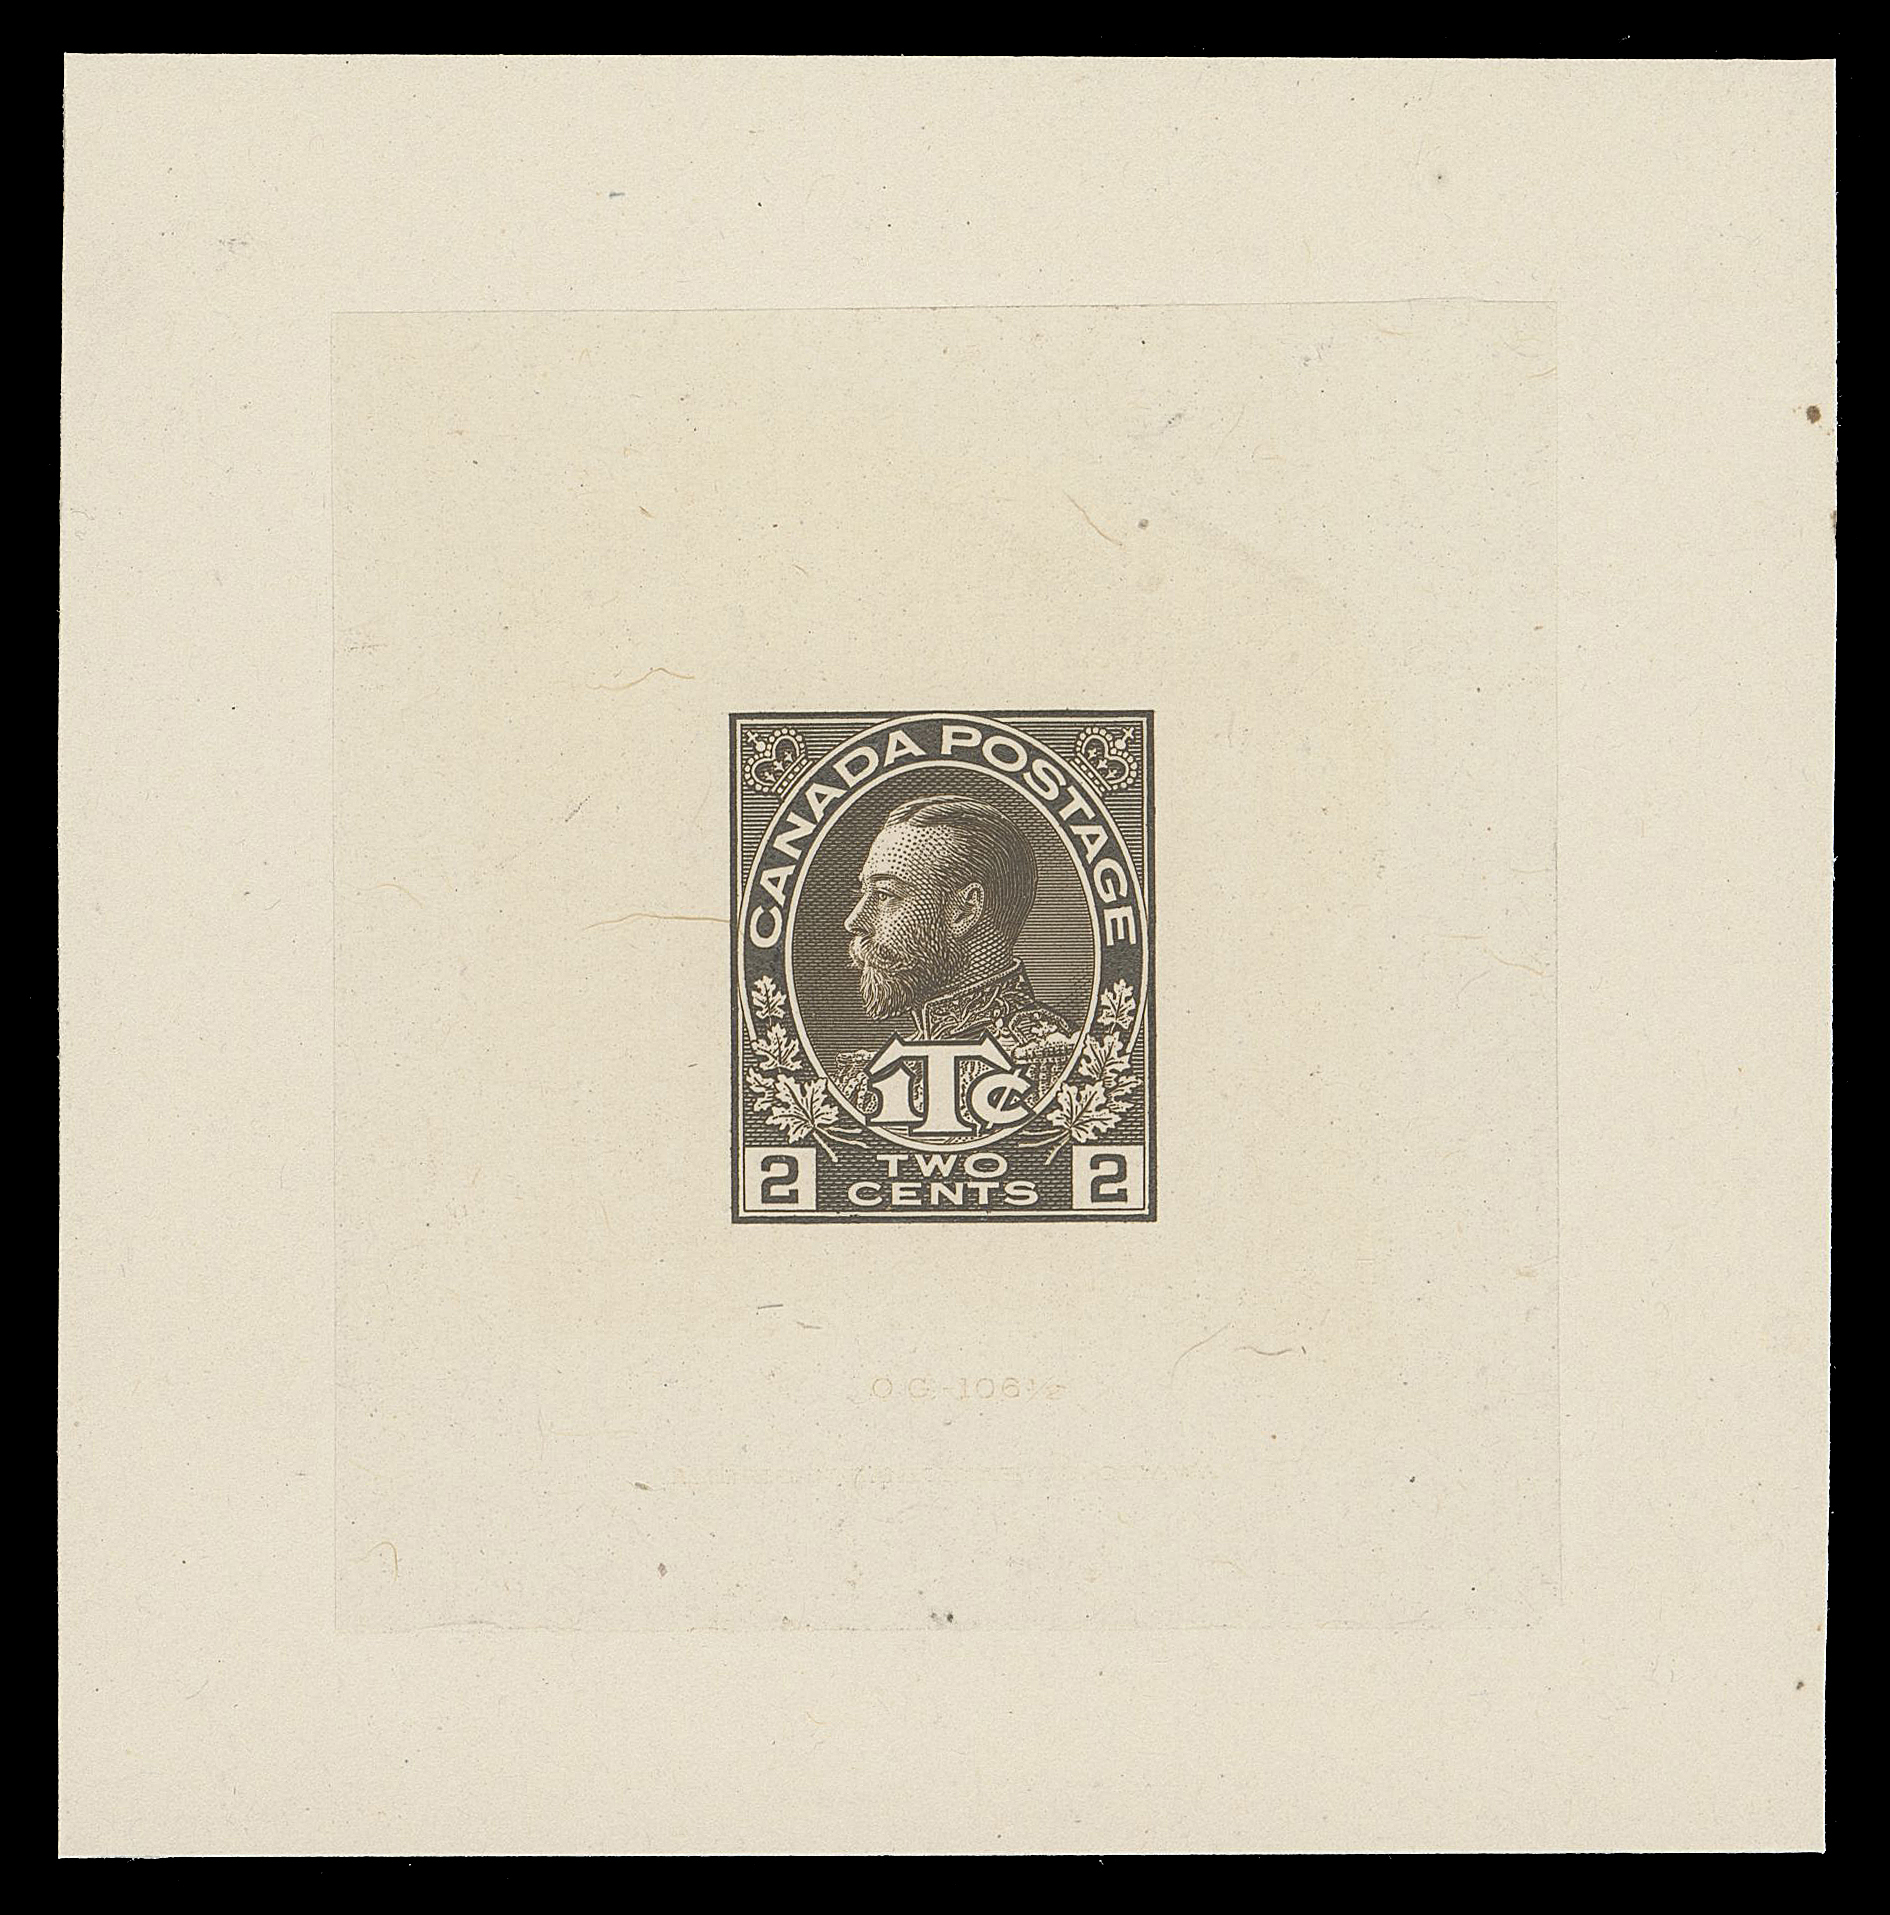 ADMIRAL PROOFS  MR4,Die Proof in the revised colour 52 x 56mm die sunk on slightly larger card 75 x 76mm; unusual albino impression of the die number "OG-106½" and American Bank Note Company Ottawa imprint (23.5mm long) visible below design. A highly select and rarely seen proof, XF (Minuse & Pratt MR4P1a)